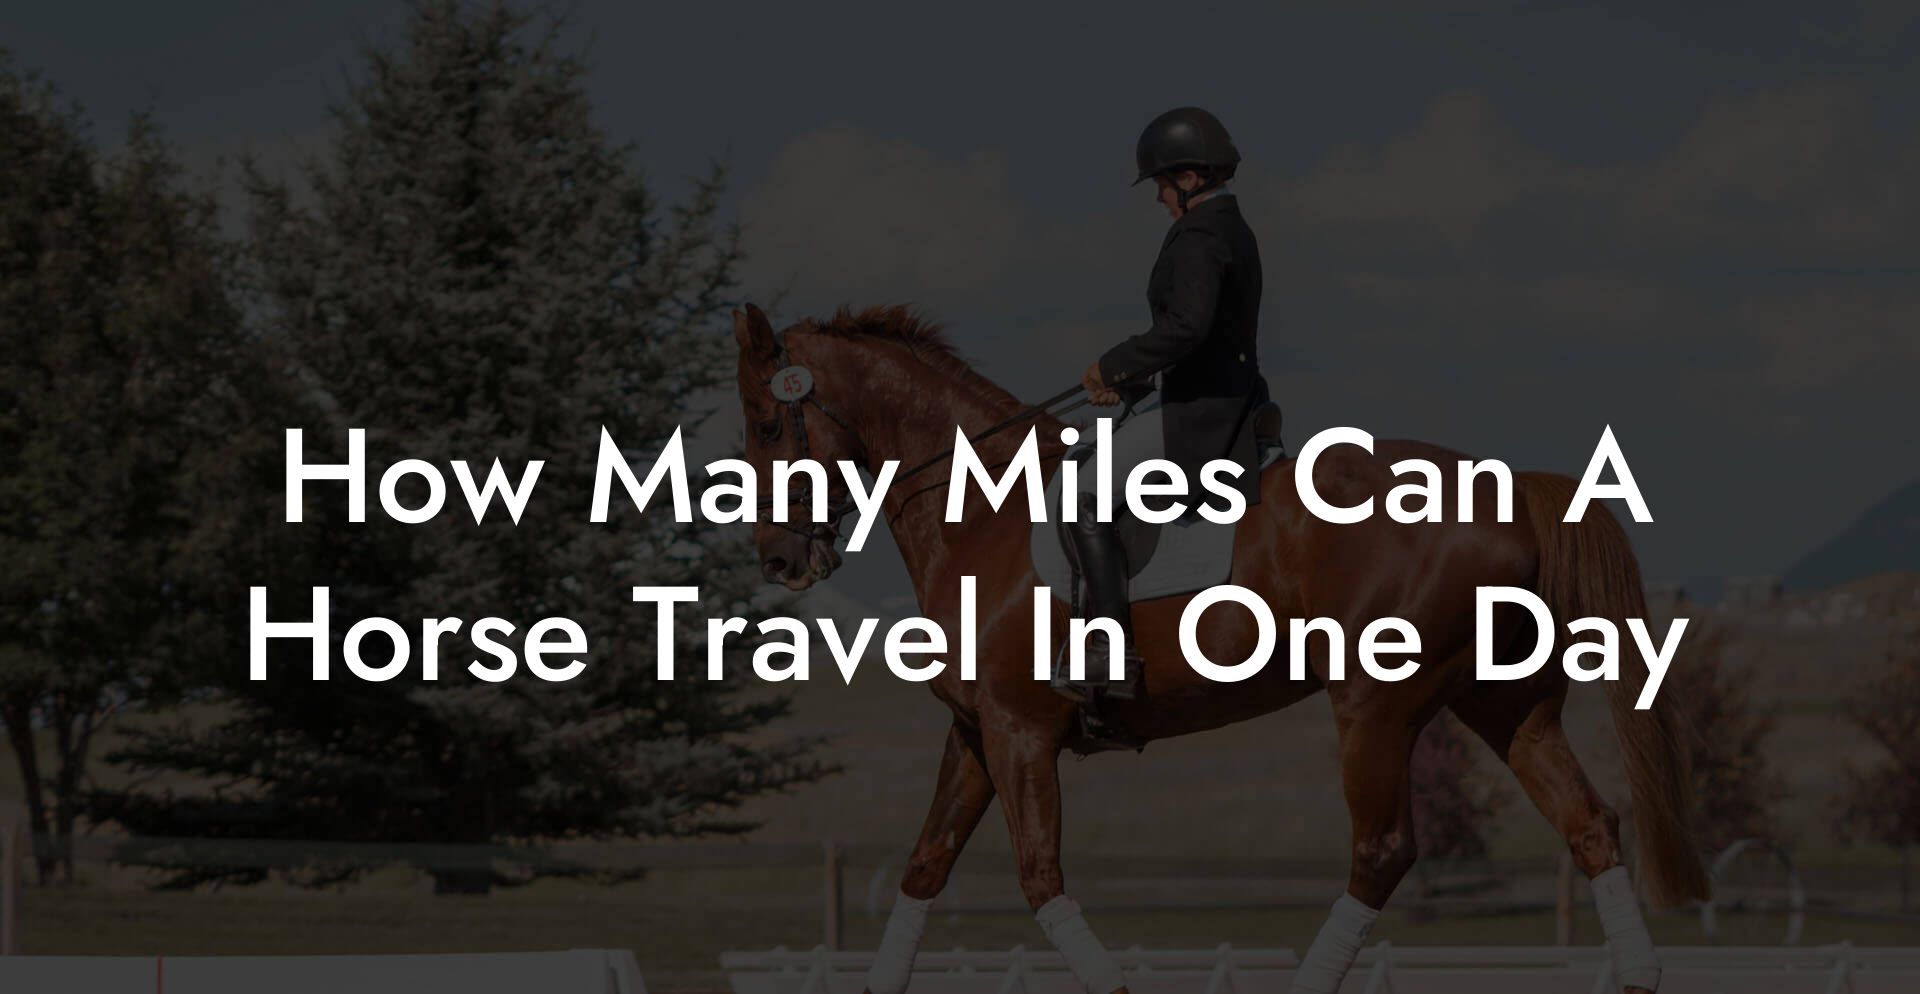 How Many Miles Can A Horse Travel In One Day